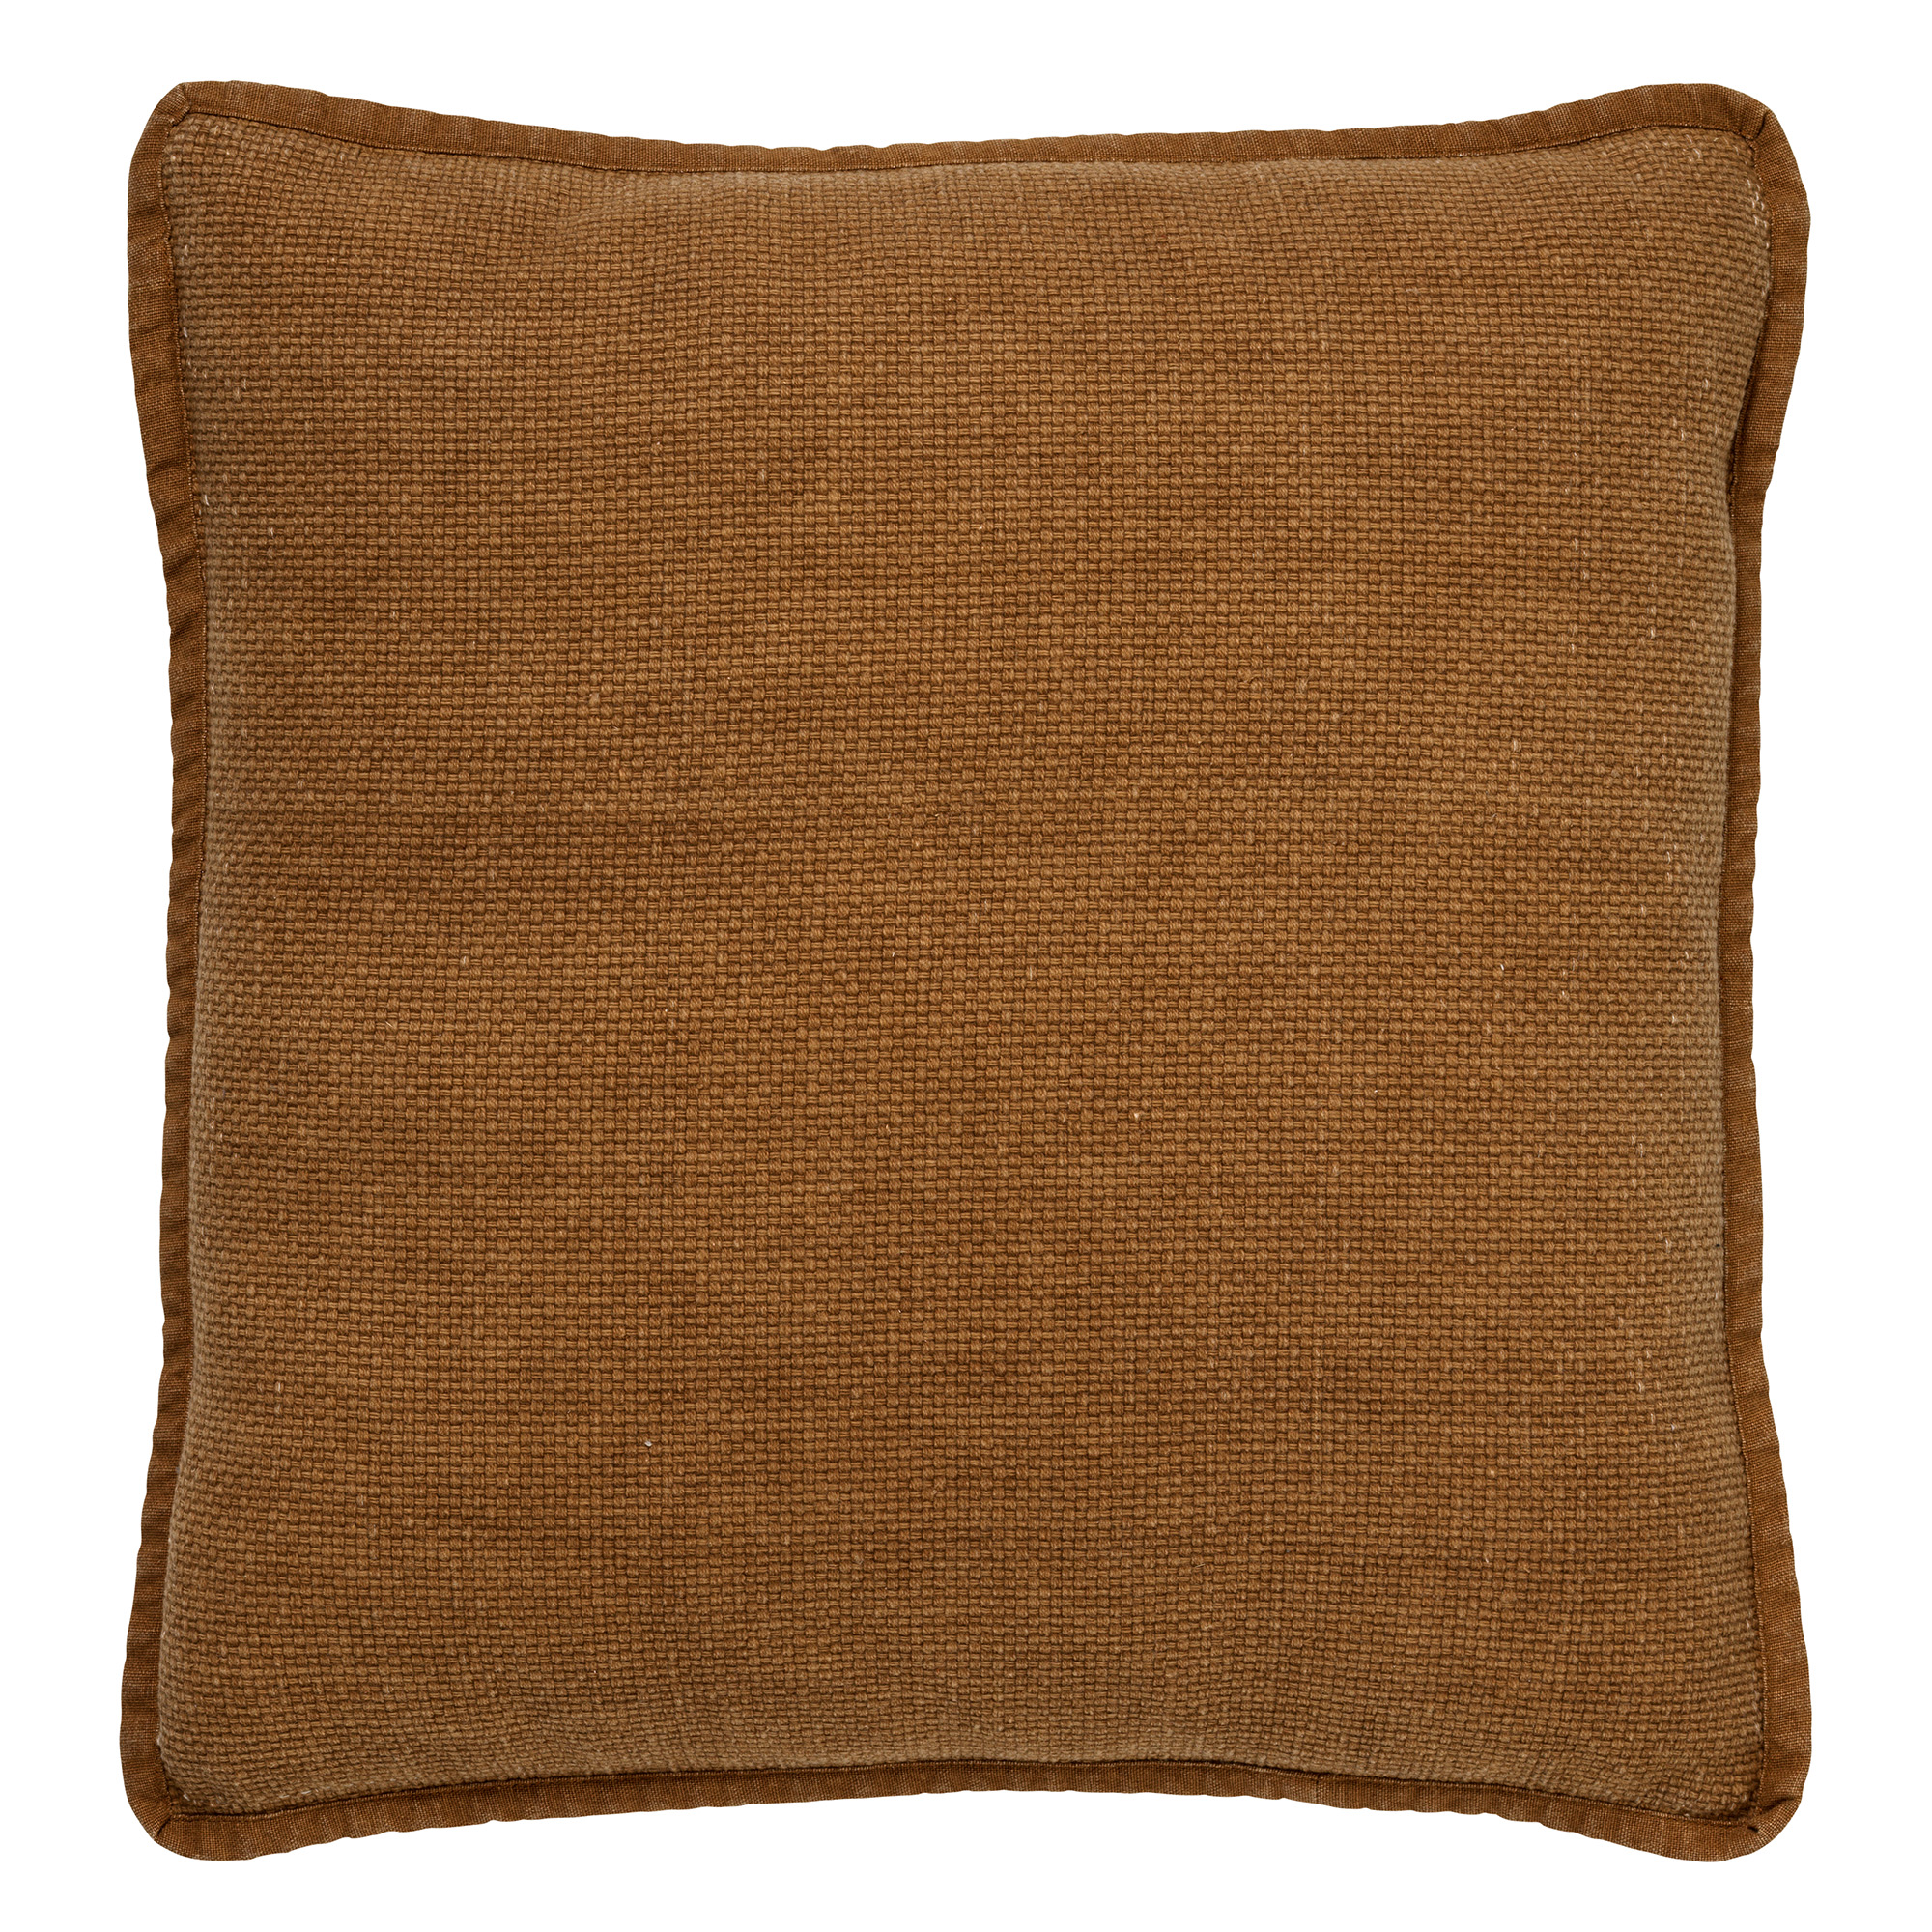 BOWIE - Cushion washed cotton 45x45 cm Tobacco Brown